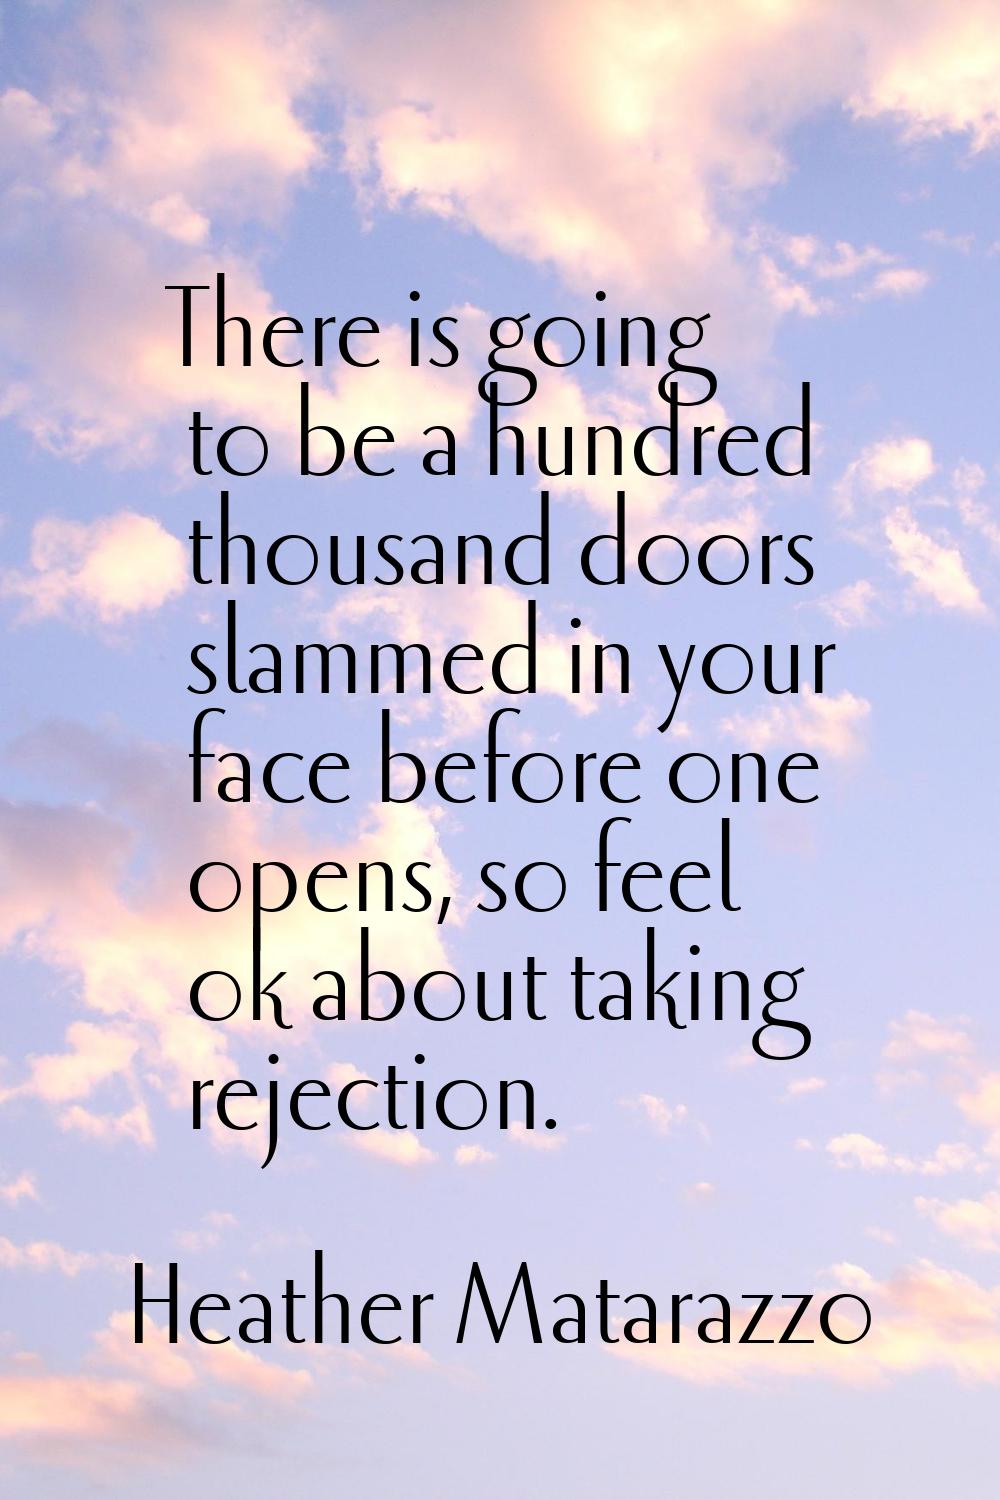 There is going to be a hundred thousand doors slammed in your face before one opens, so feel ok abo